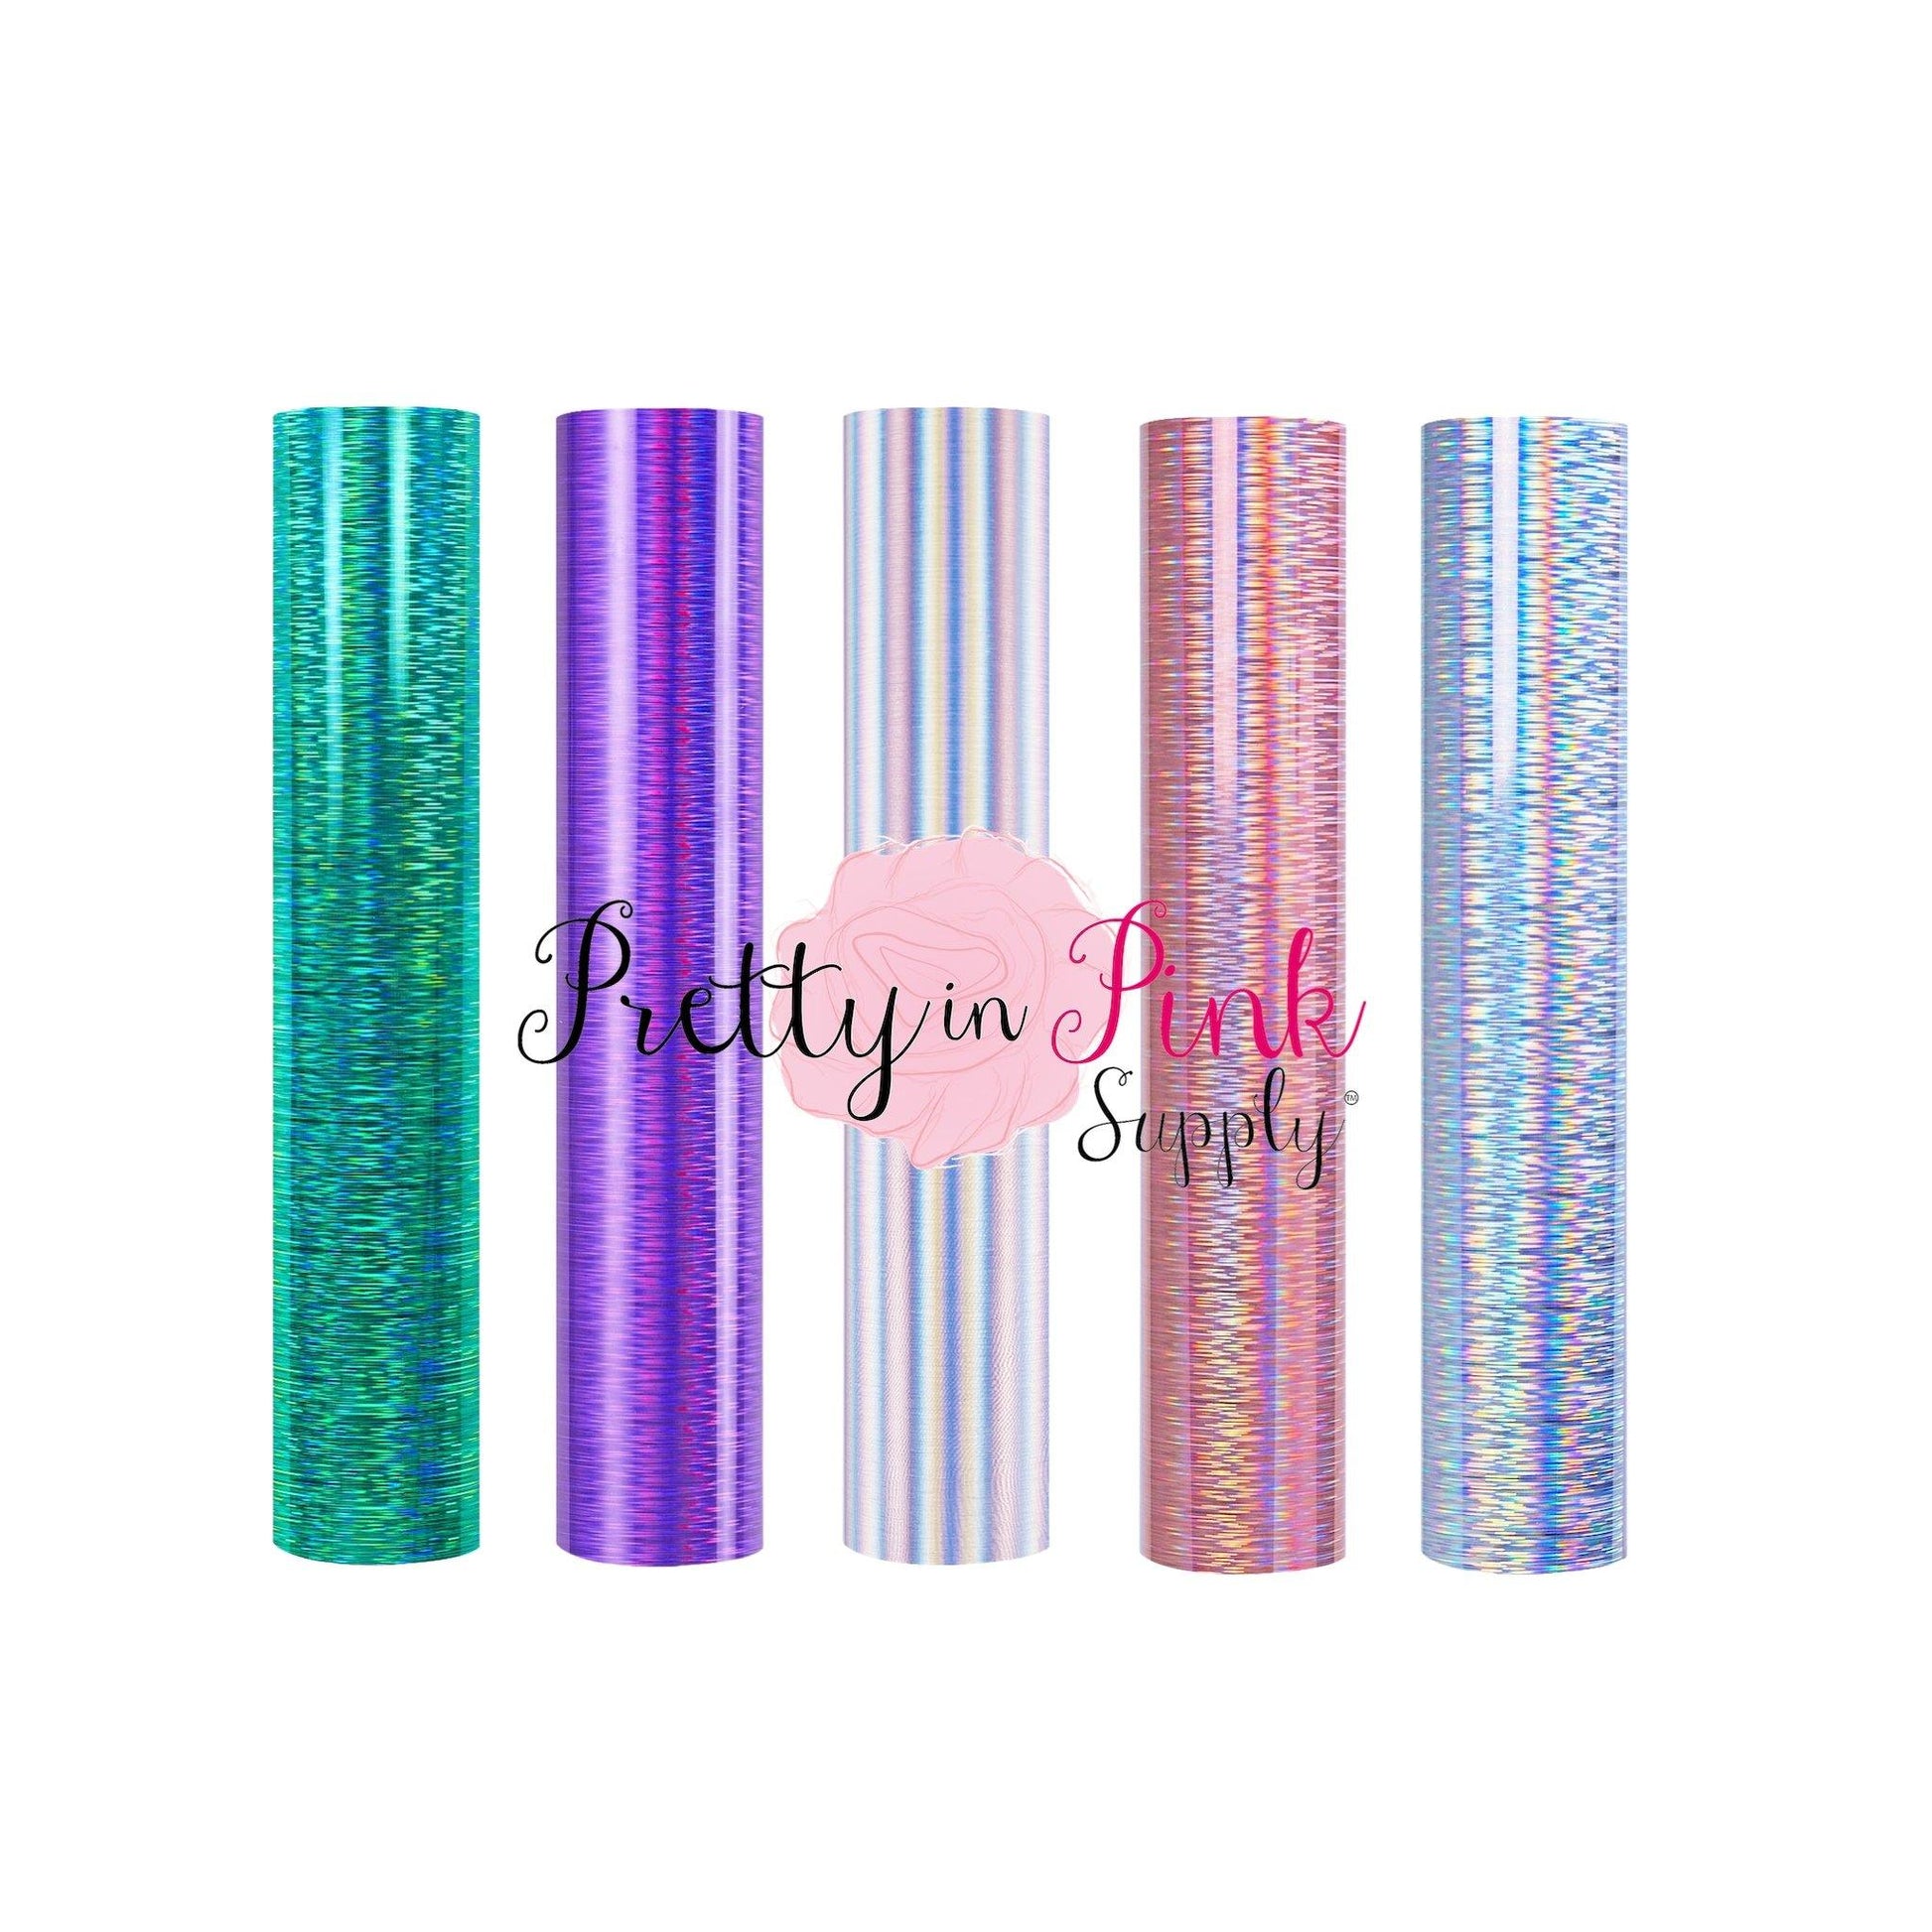 Hot Pink Holographic Adhesive Vinyl Rolls By Craftables